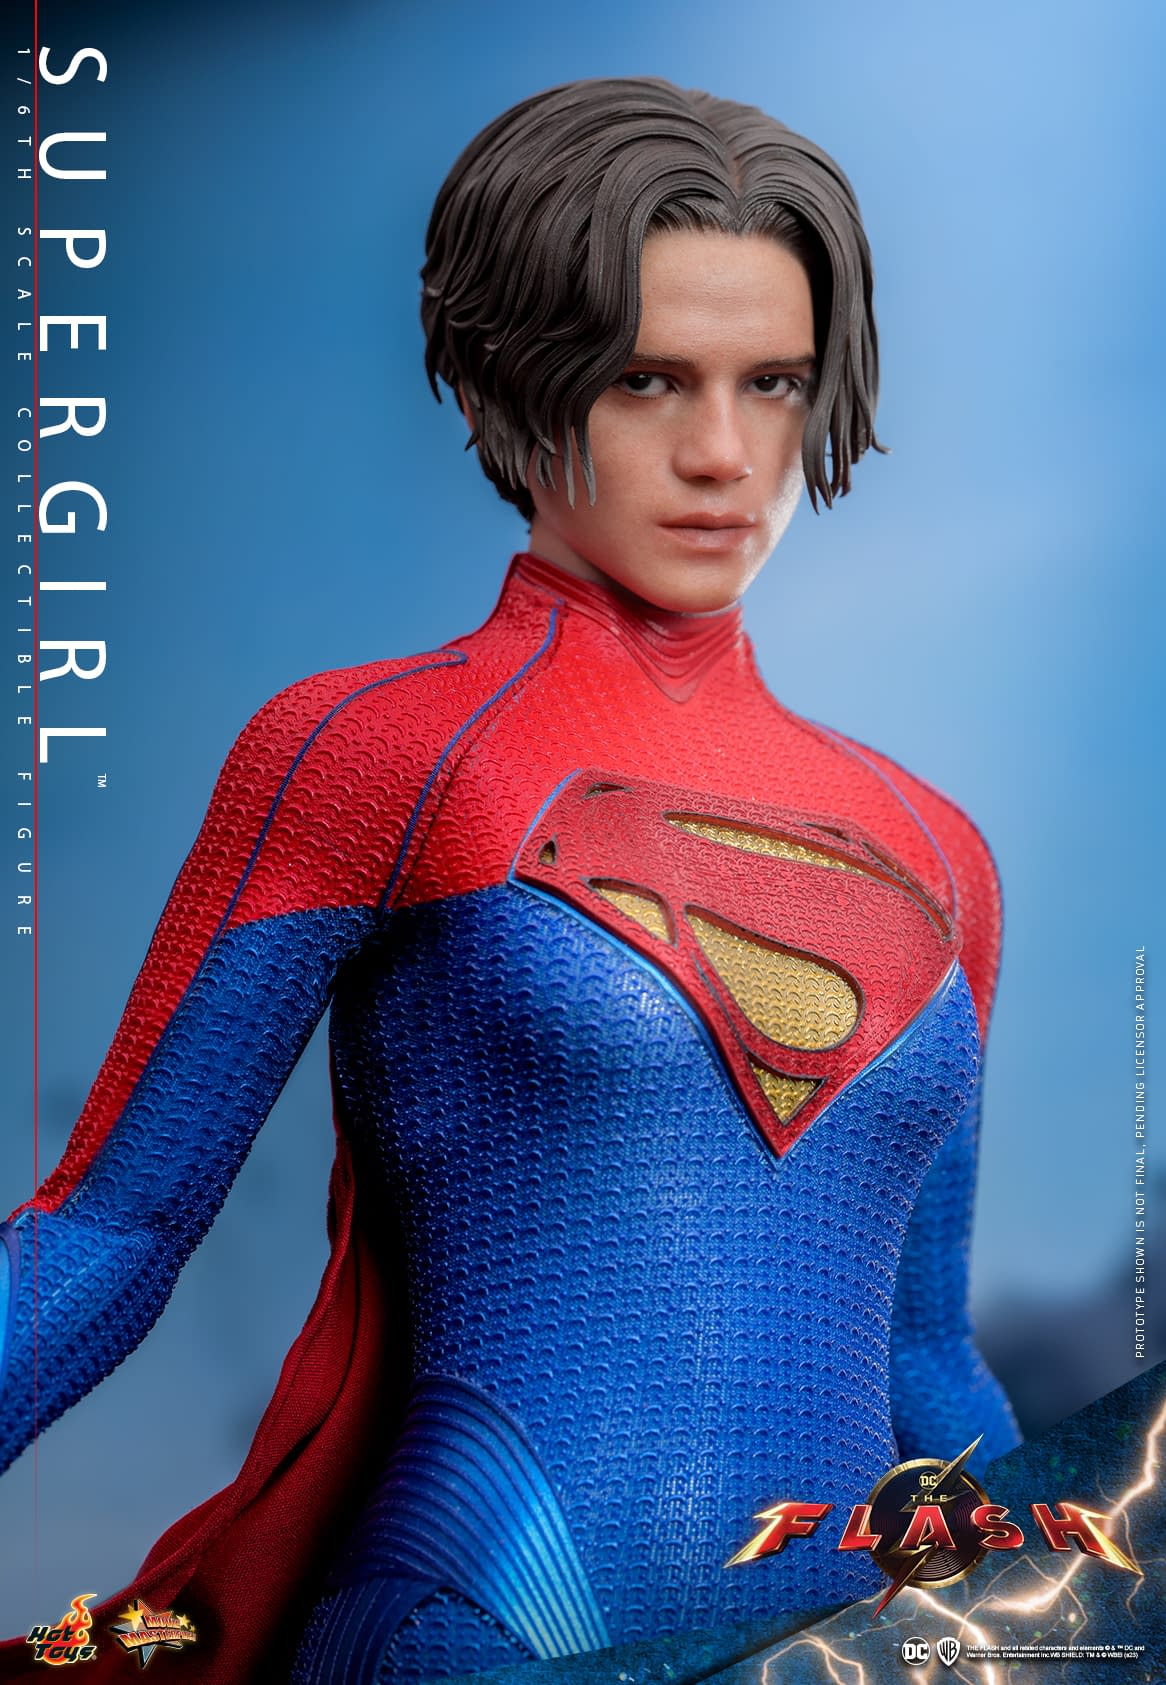 Supergirl Lands at Hot Toys with New 1/6 Scale Figure for The Flash